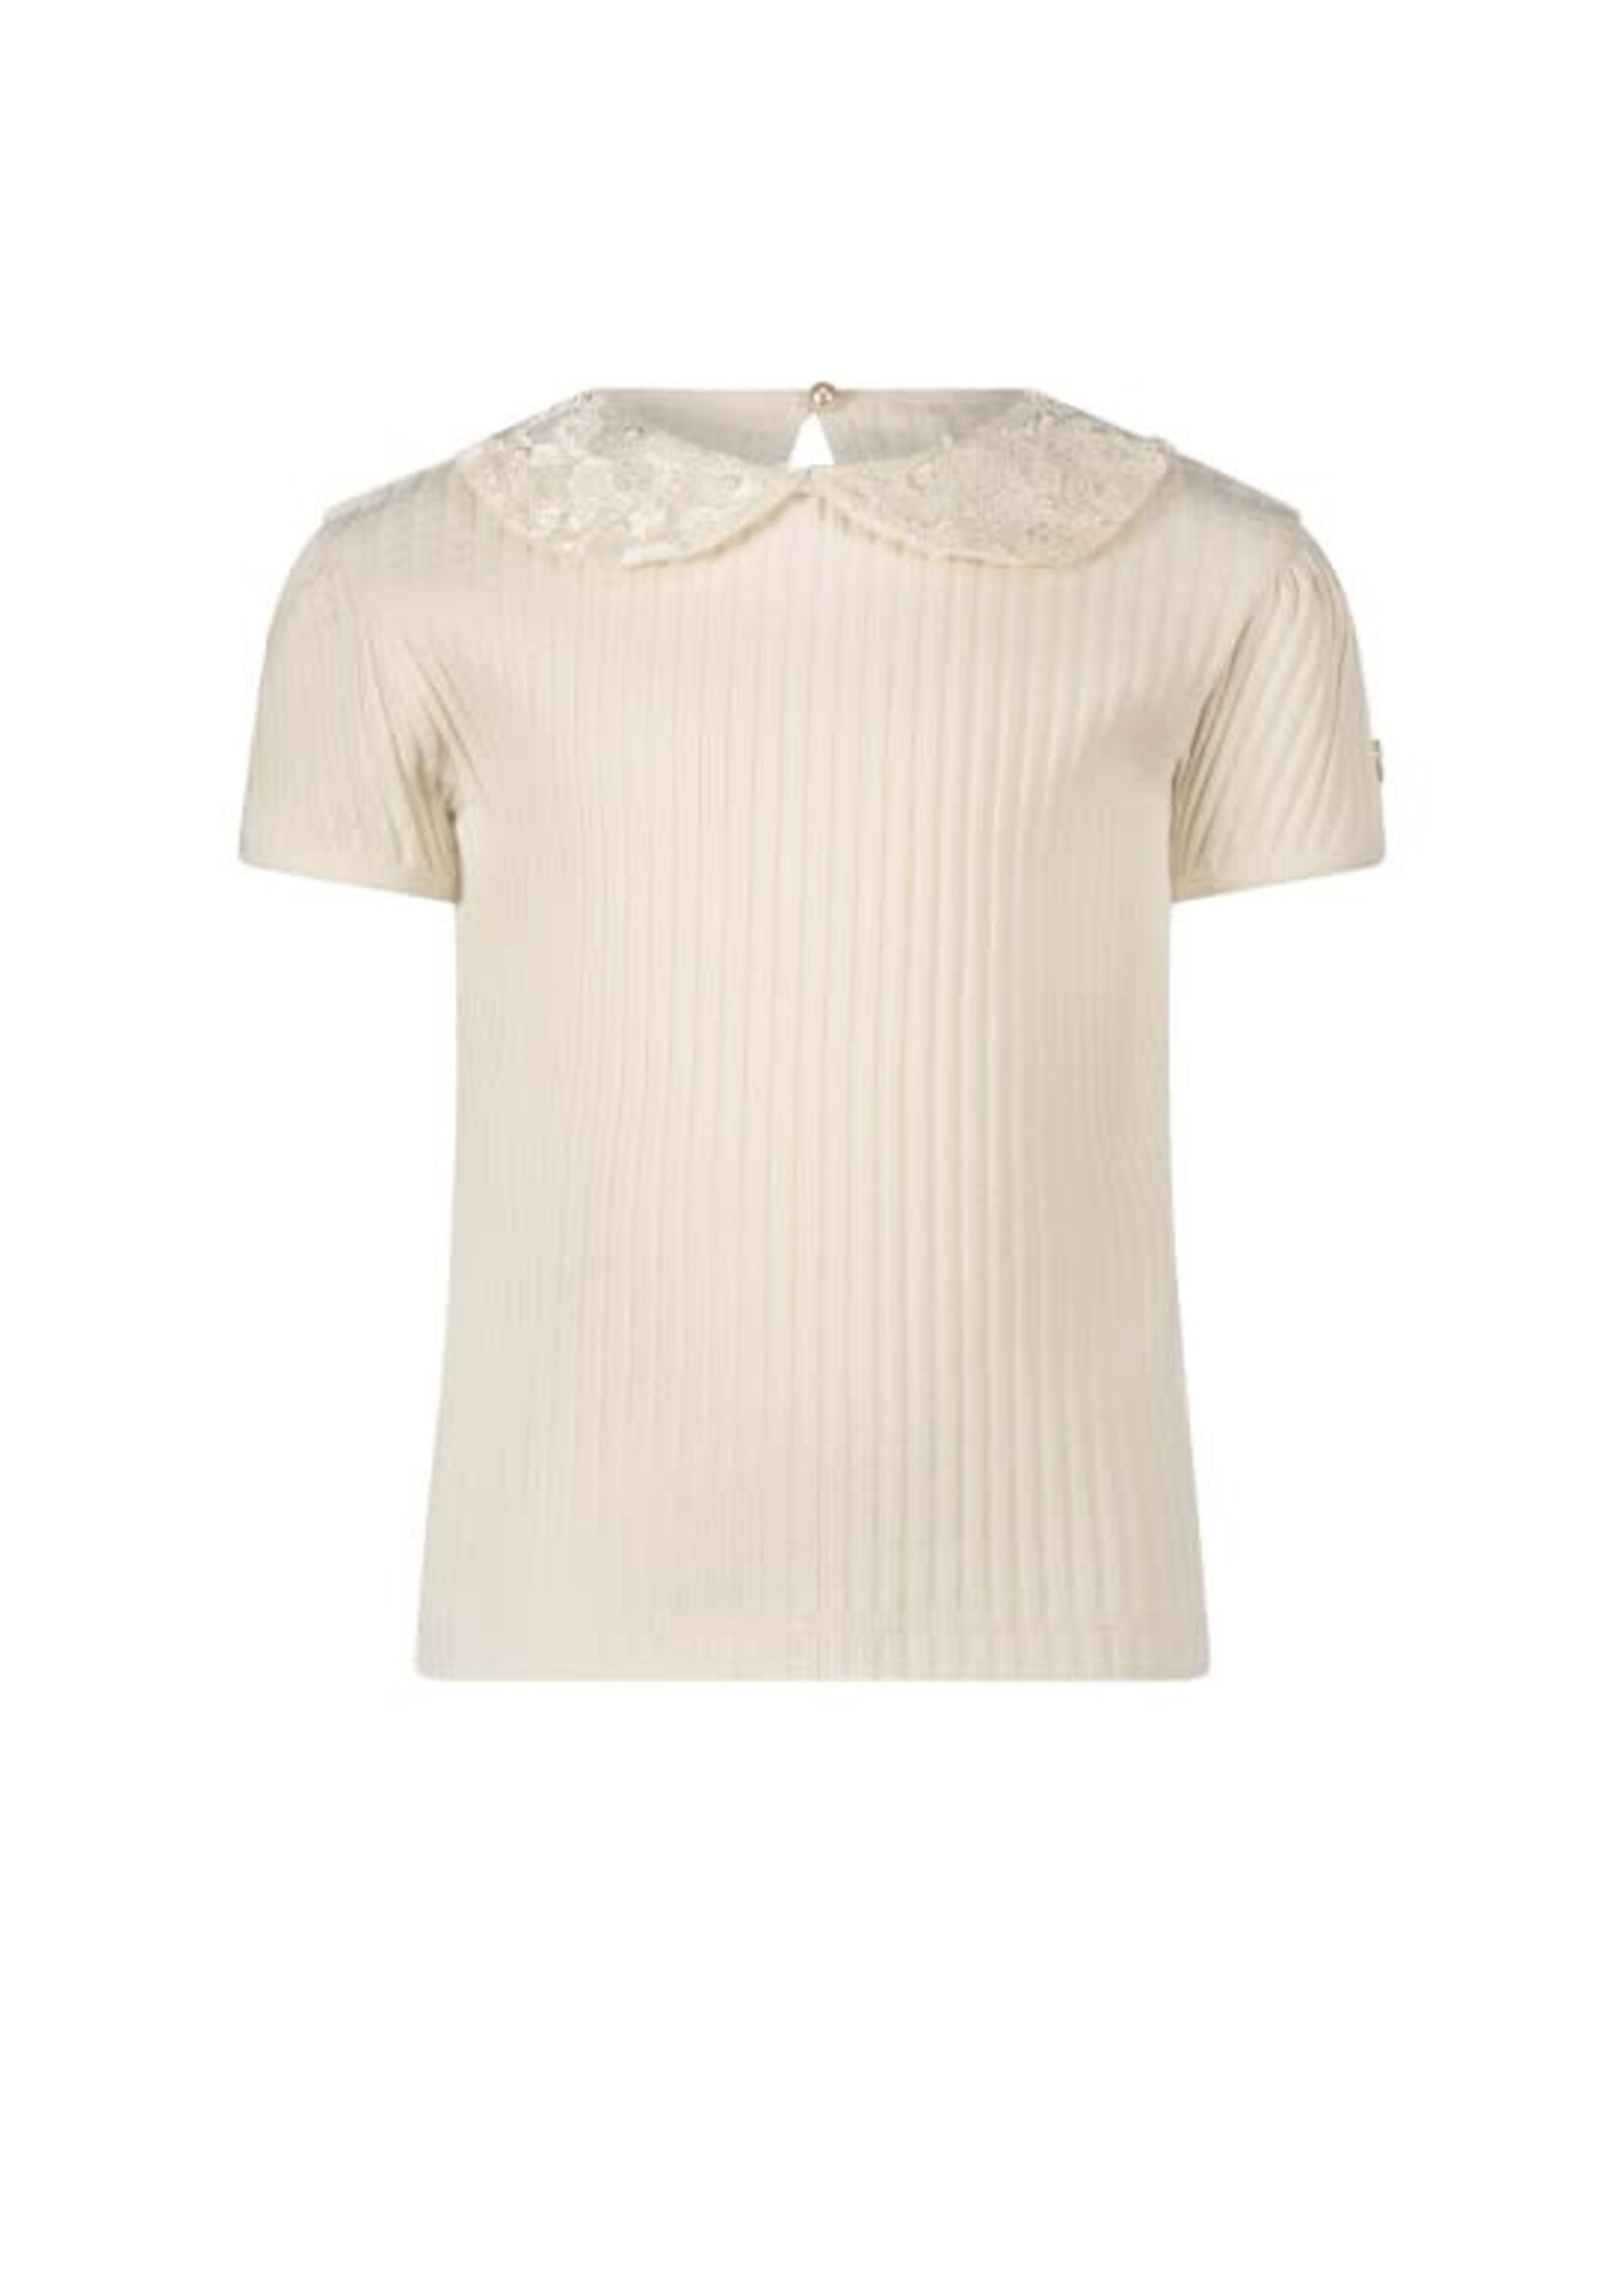 Le Chic Le Chic NARLY summer cableknit T-shirt C312-5408 Oatmeal Elite